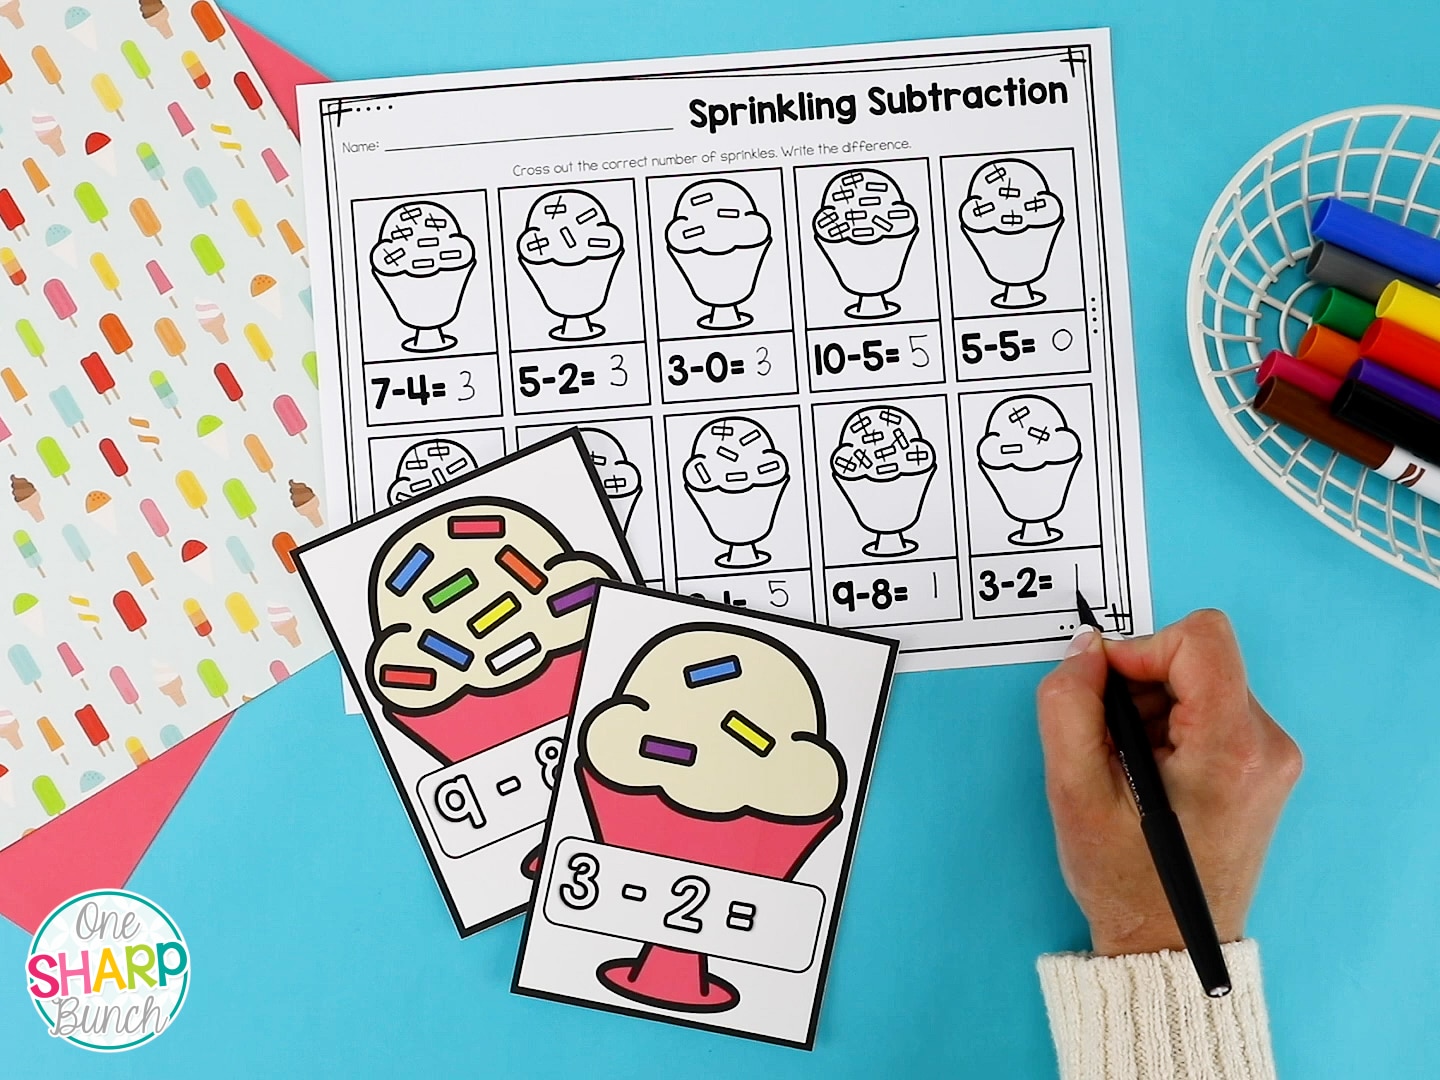 An ice cream day is the perfect way to countdown to the end of the year. Today, I am sharing my favorite ice cream day activities for kids. This classroom theme day allows early elementary students to work on math skills and literacy skills. Students get to work on an escape room, ice cream centers for beginning digraphs, rhyming words and CVC words. They also get to work on 1:1 counting and making patterns. Enjoy these end of year activities in your kindergarten and first grade classroom!